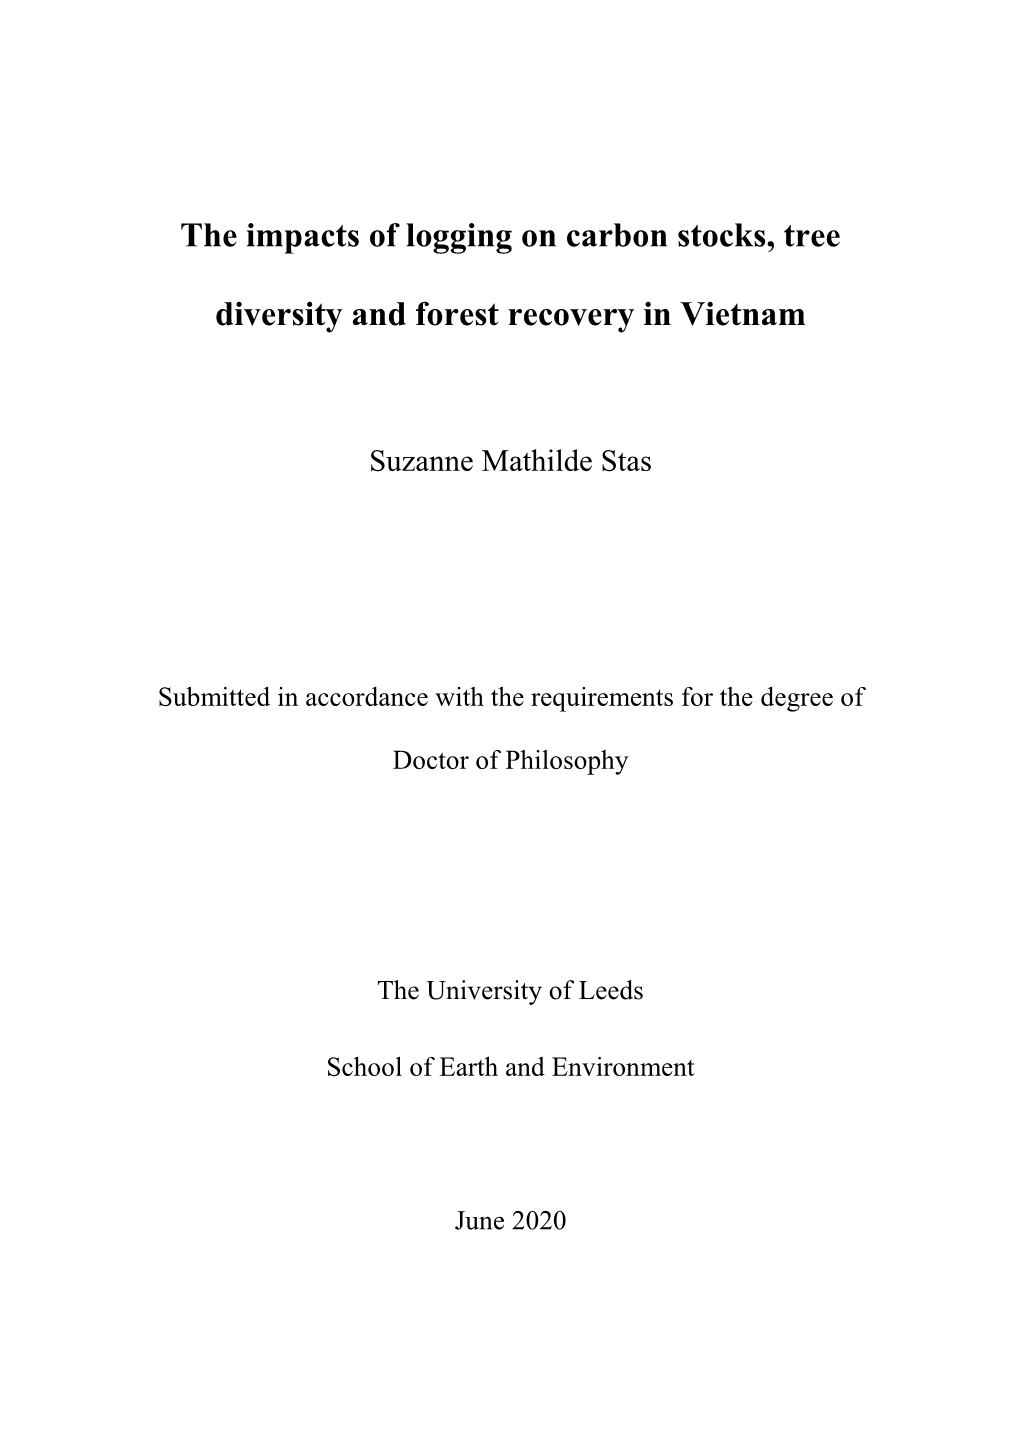 The Impacts of Logging on Carbon Stocks, Tree Diversity and Forest